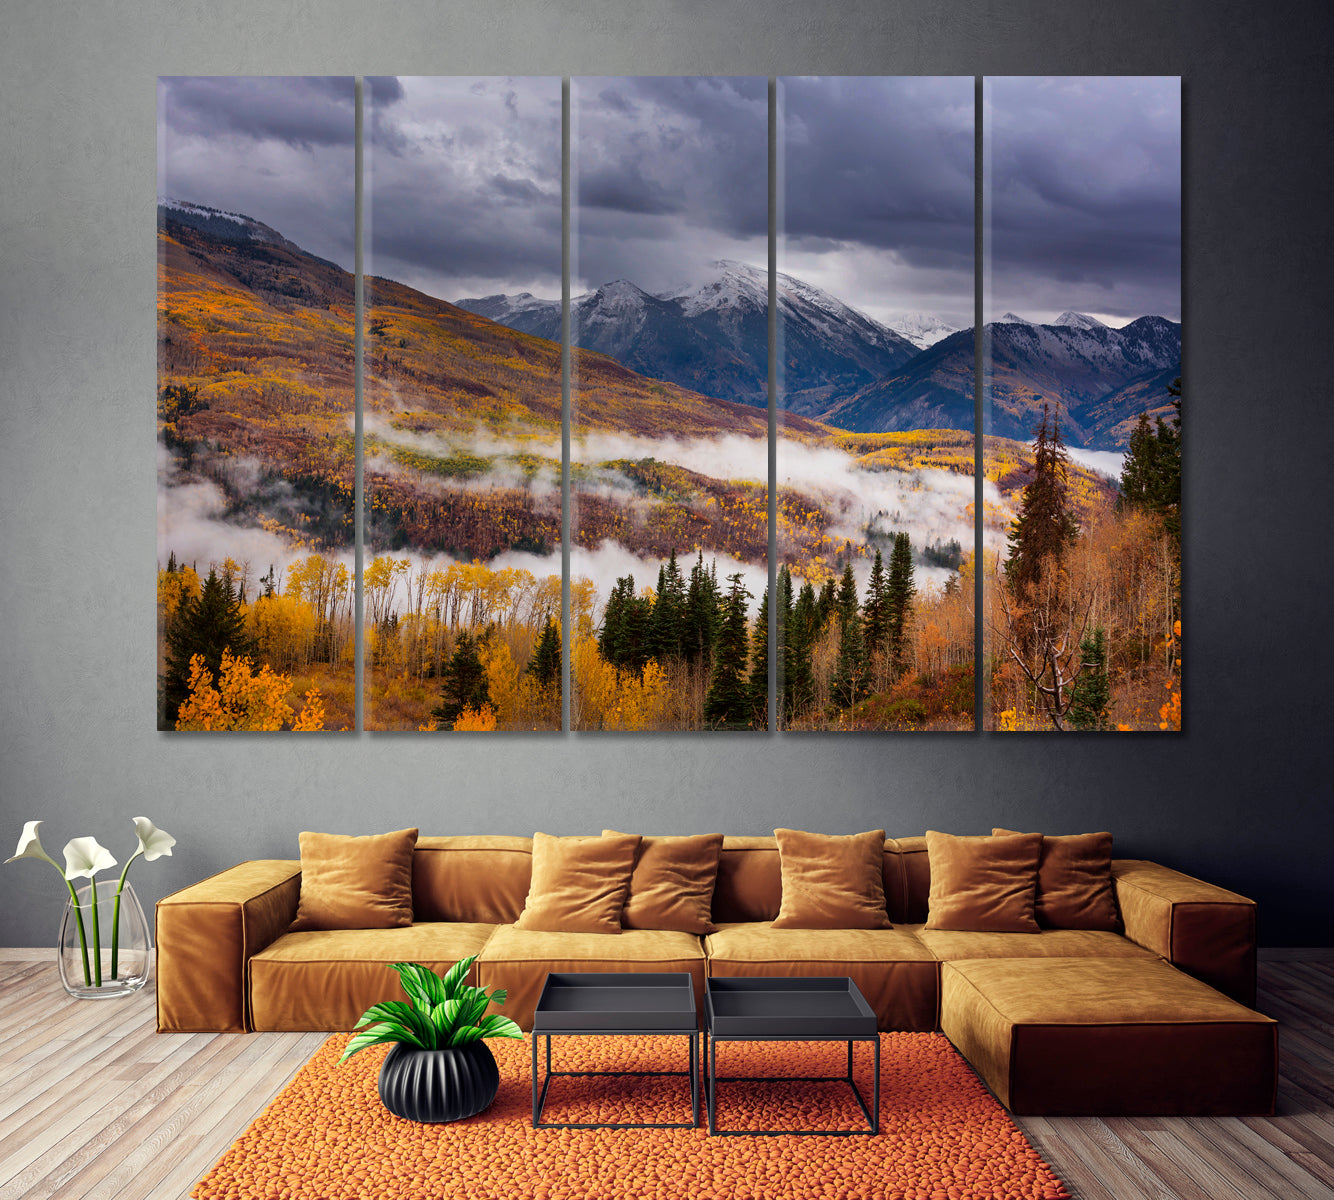 Colorado Rocky Mountains Valley in Fog Canvas Print ArtLexy 5 Panels 36"x24" inches 